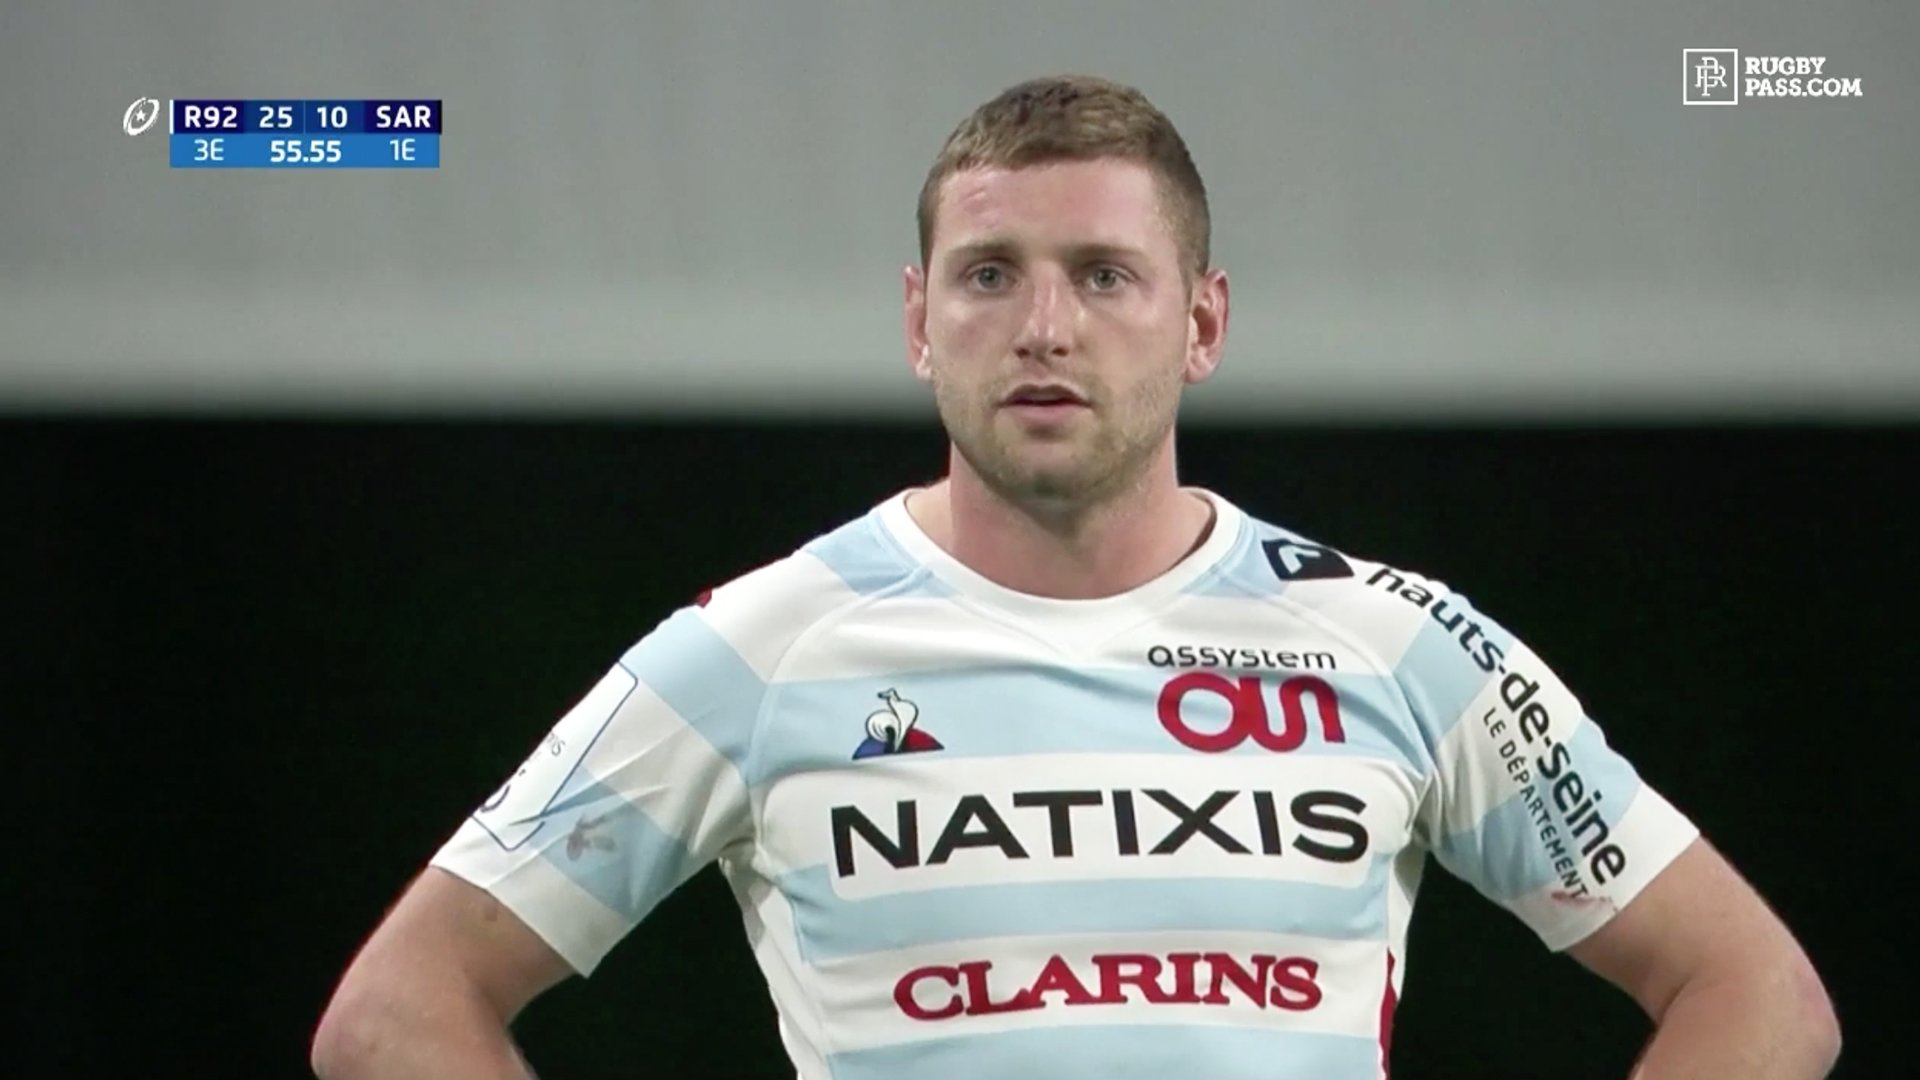 Finn Russell wanted after pulling 15 men's pants down for 80 minutes somewhere in Paris